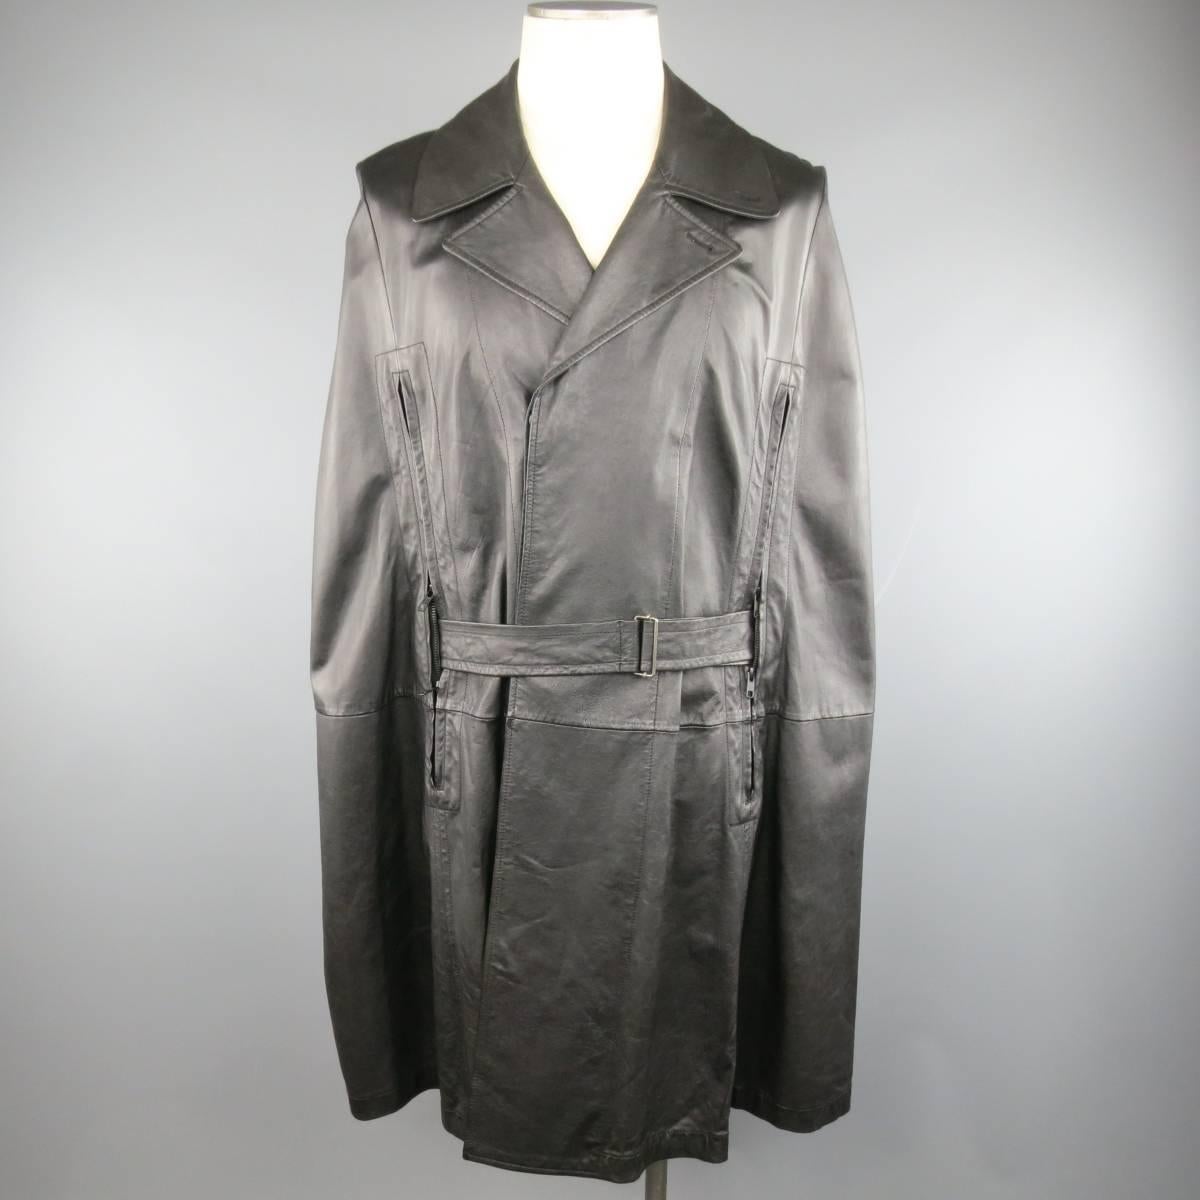 Rare ANN DEMEULEMEESTER cape in a  light weight smooth black leather featuring a classic pointed lapel, hidden placket double breasted closure, and double zip frontal slits with belt. Made in Italy.
 
Excellent Pre-Owned Condition.
Marked: SXX
